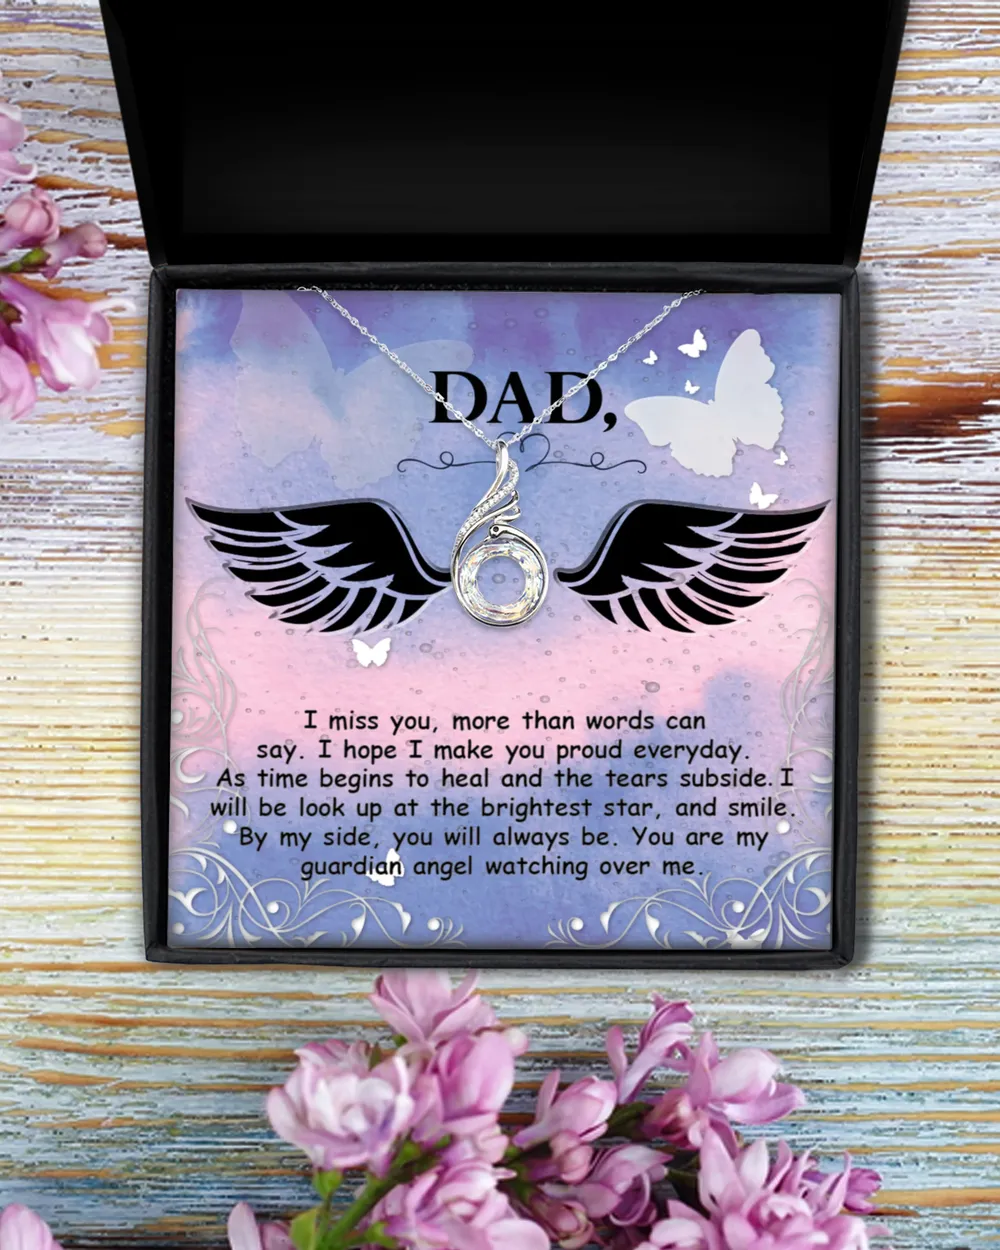 I miss you more than - dad